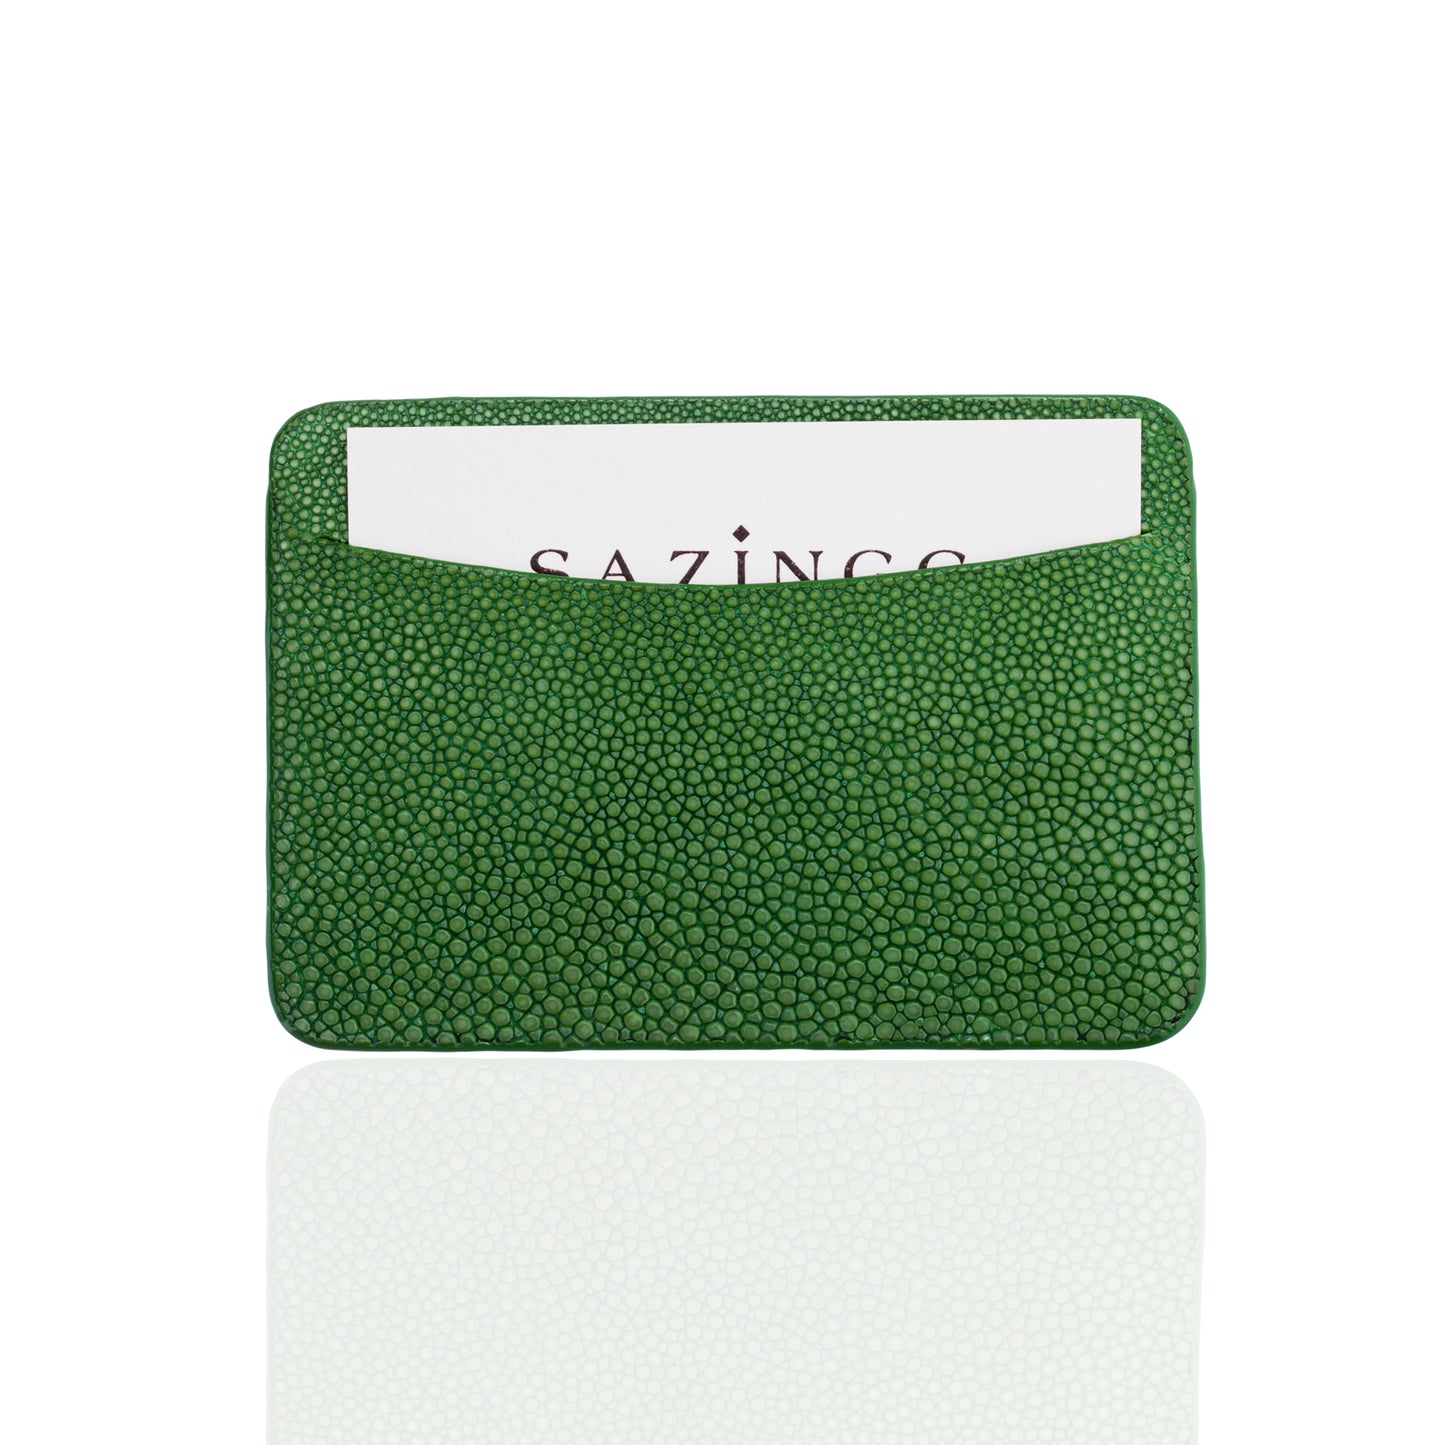 Load image into Gallery viewer, Credit Card Pouch in Green Stingray Leather
